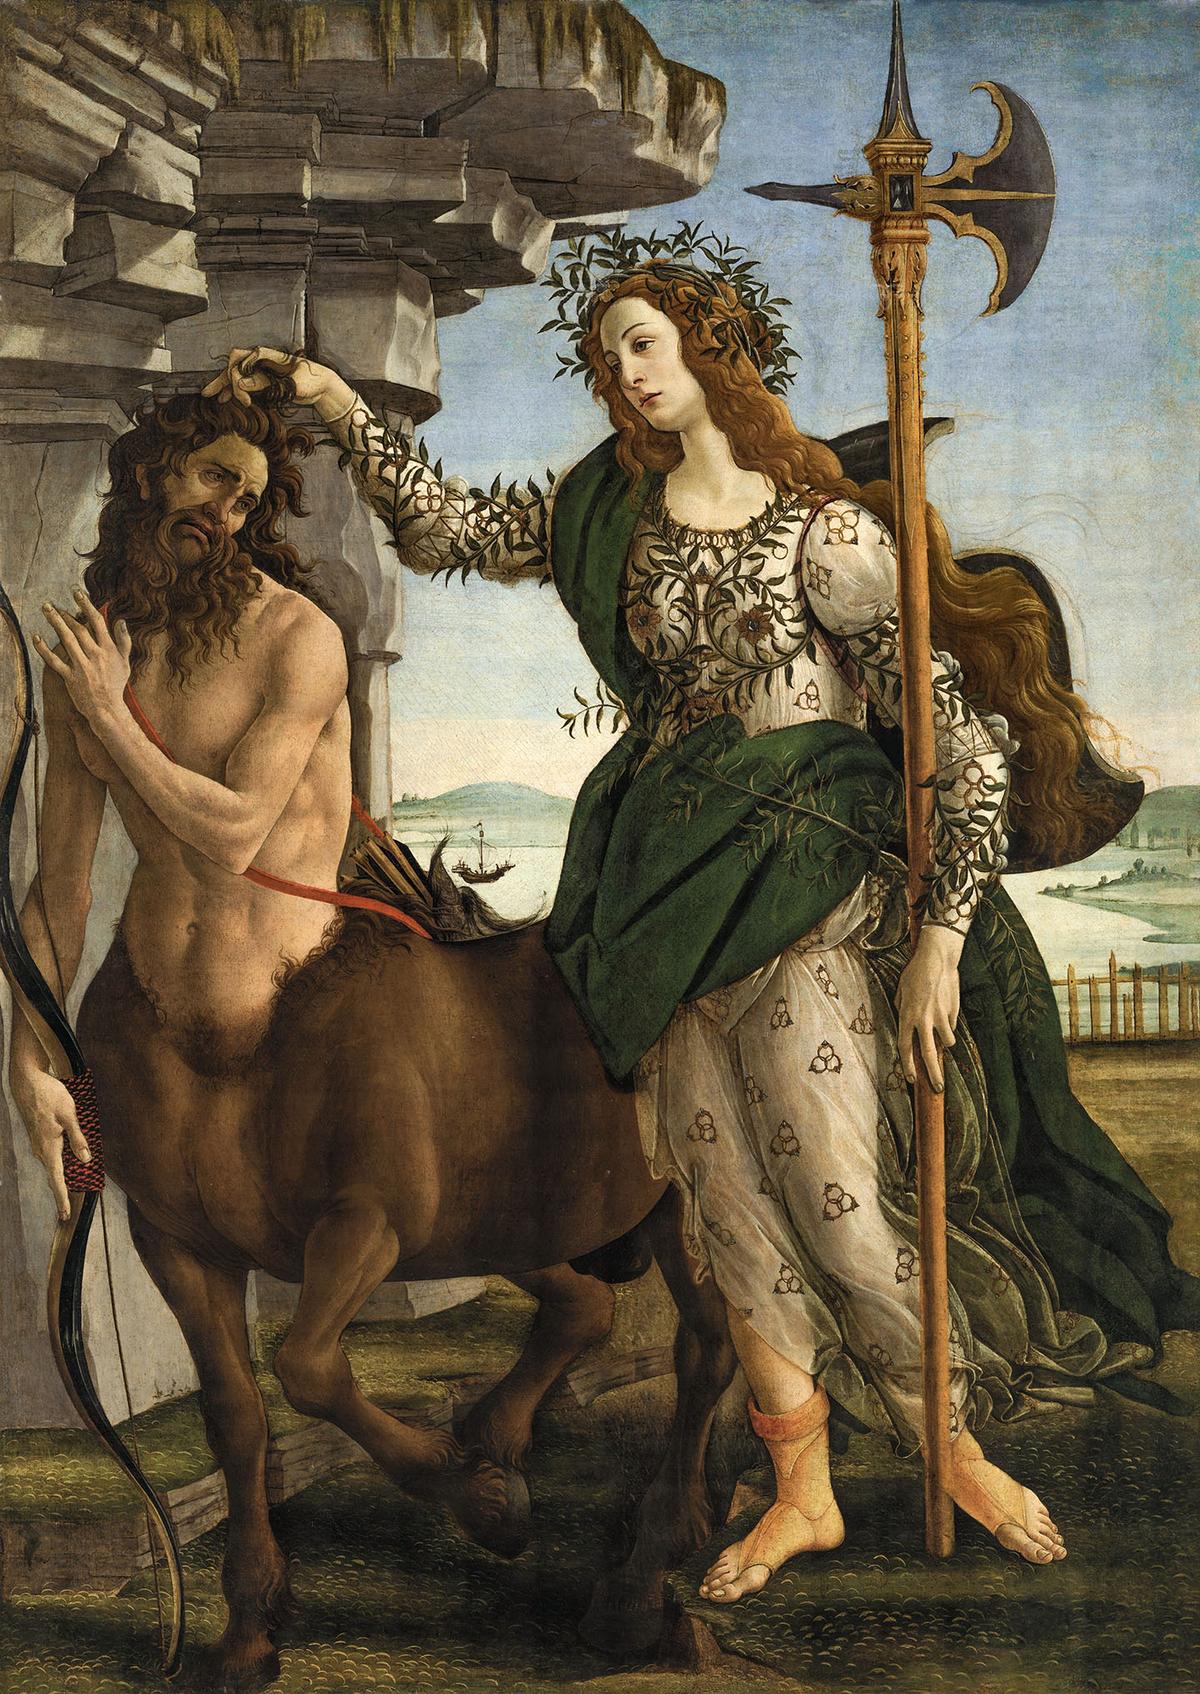 "Pallas and the Centaur," circa 1480–1485, by Sandro Botticelli. Tempera on canvas. Uffizi Gallery, Florence, Italy. (<a href="https://commons.wikimedia.org/wiki/File:Pallade_col_Centauro,_Sandro_Botticelli_(1482).jpg">Gennadii Saus i Segura</a>/<a href="https://creativecommons.org/licenses/by-sa/4.0/deed.en">CC BY-SA 4.0</a>)